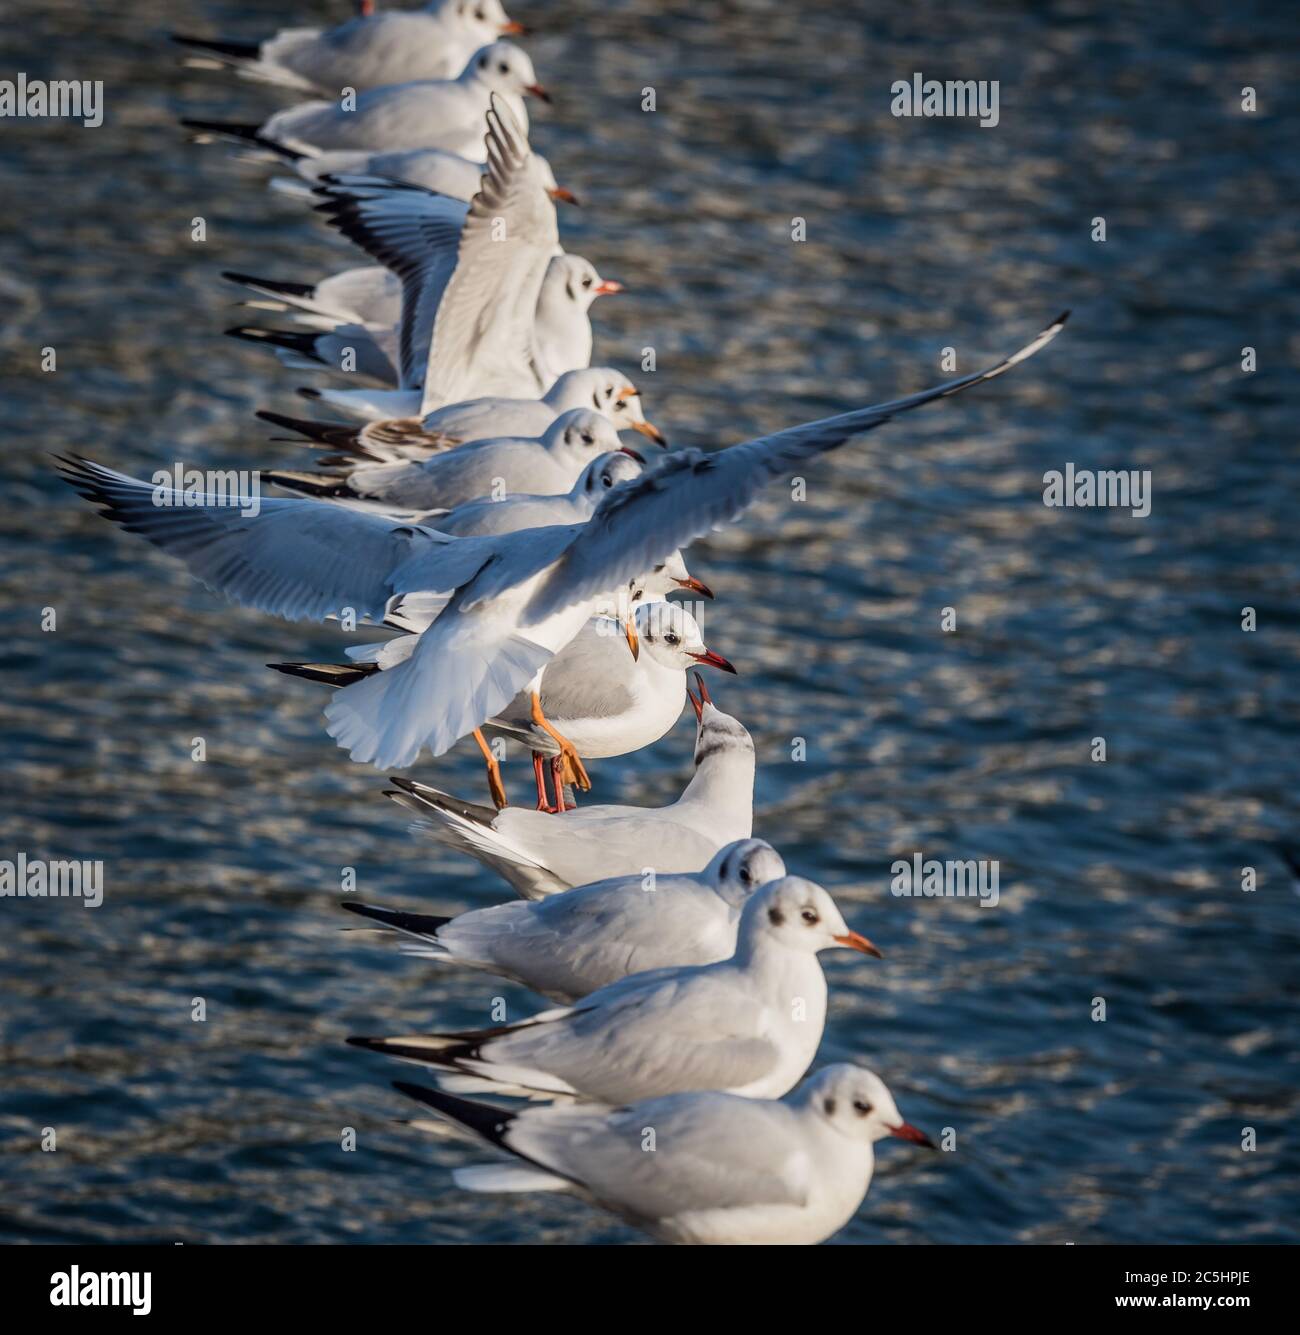 A seagull flies to a rope with many other seagulls. Symbolic photo for lack of space, tightness and claustrophobia Stock Photo